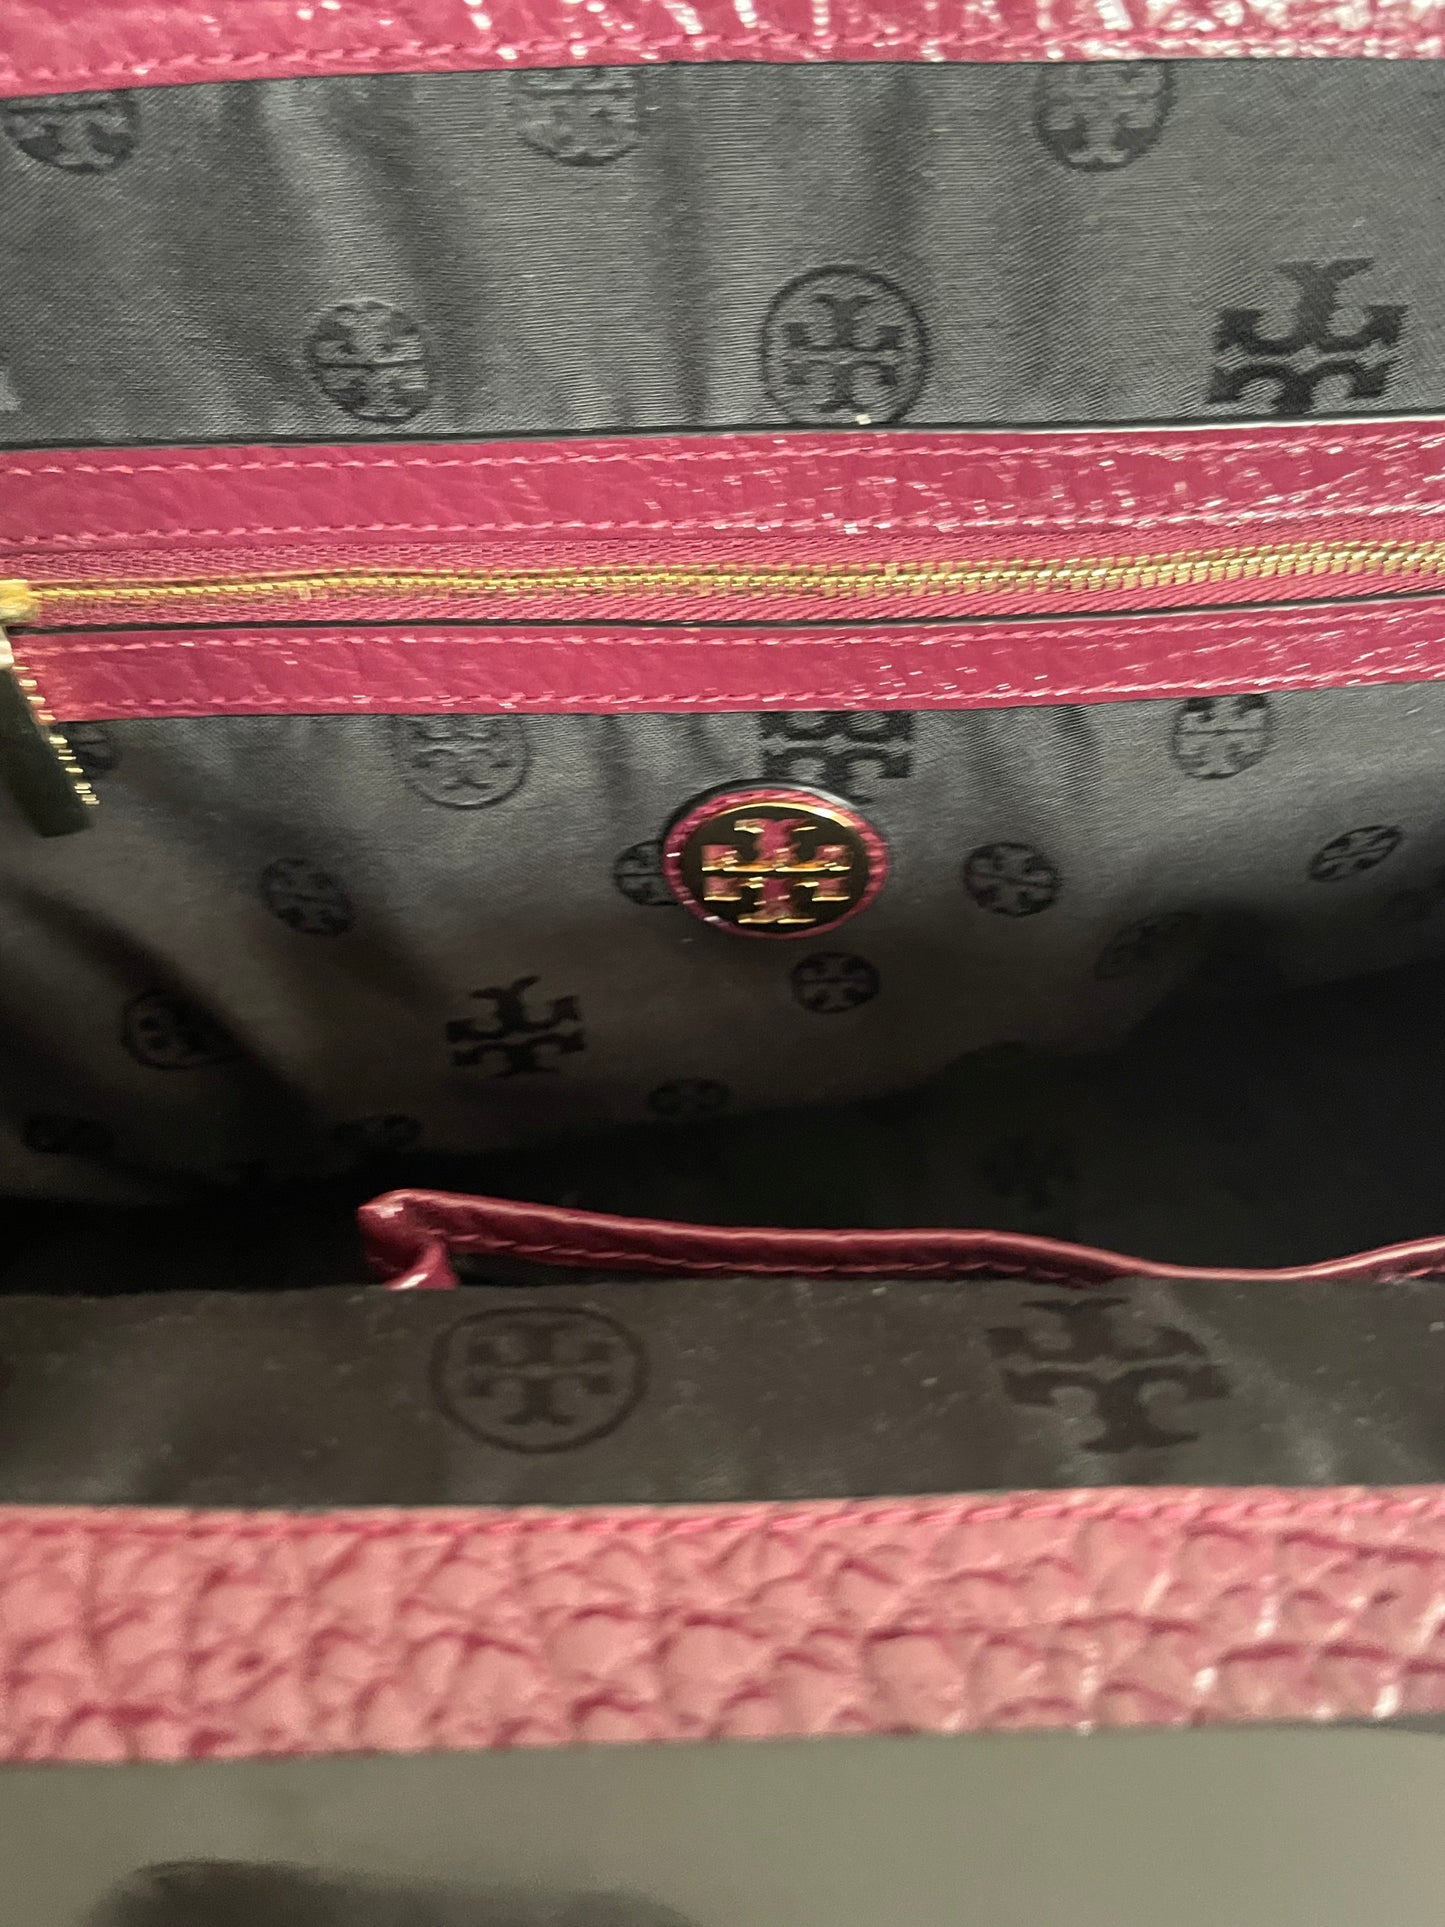 Tory Burch Maroon Large Leather Tote